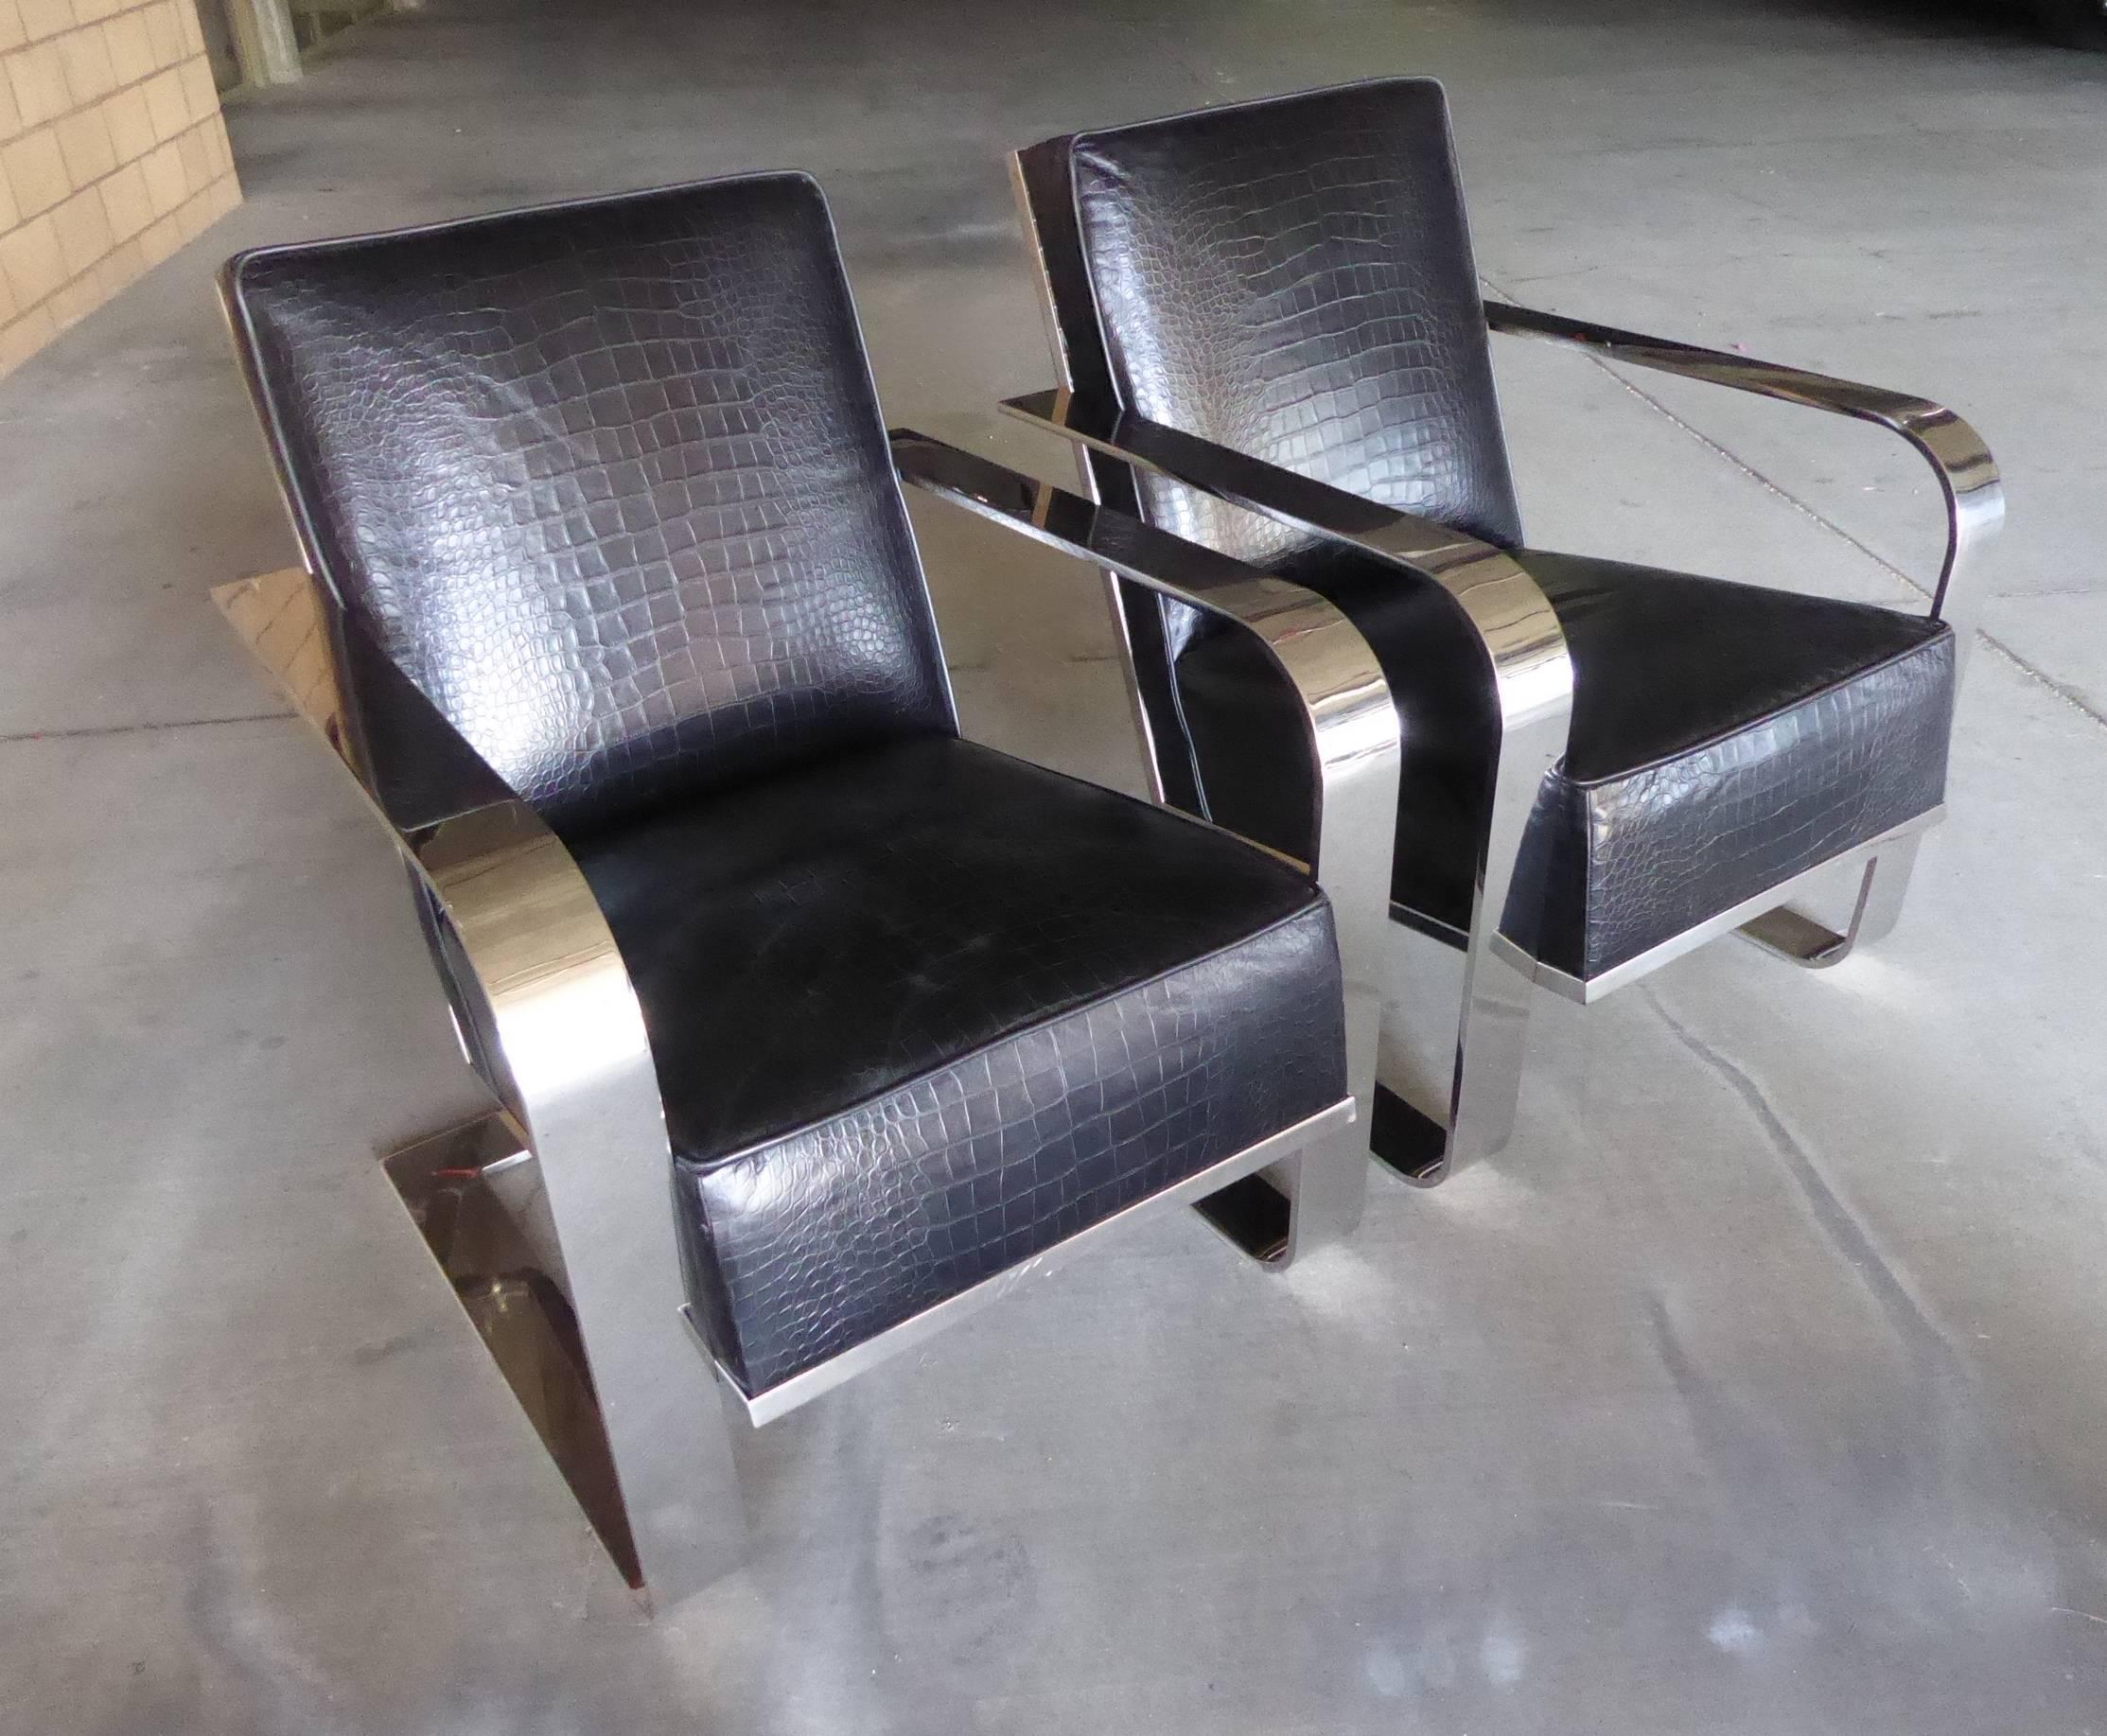 Pair of Art Deco Inspired Nickeled Steel and Leather Lounge Chairs, Ralph Lauren For Sale 1